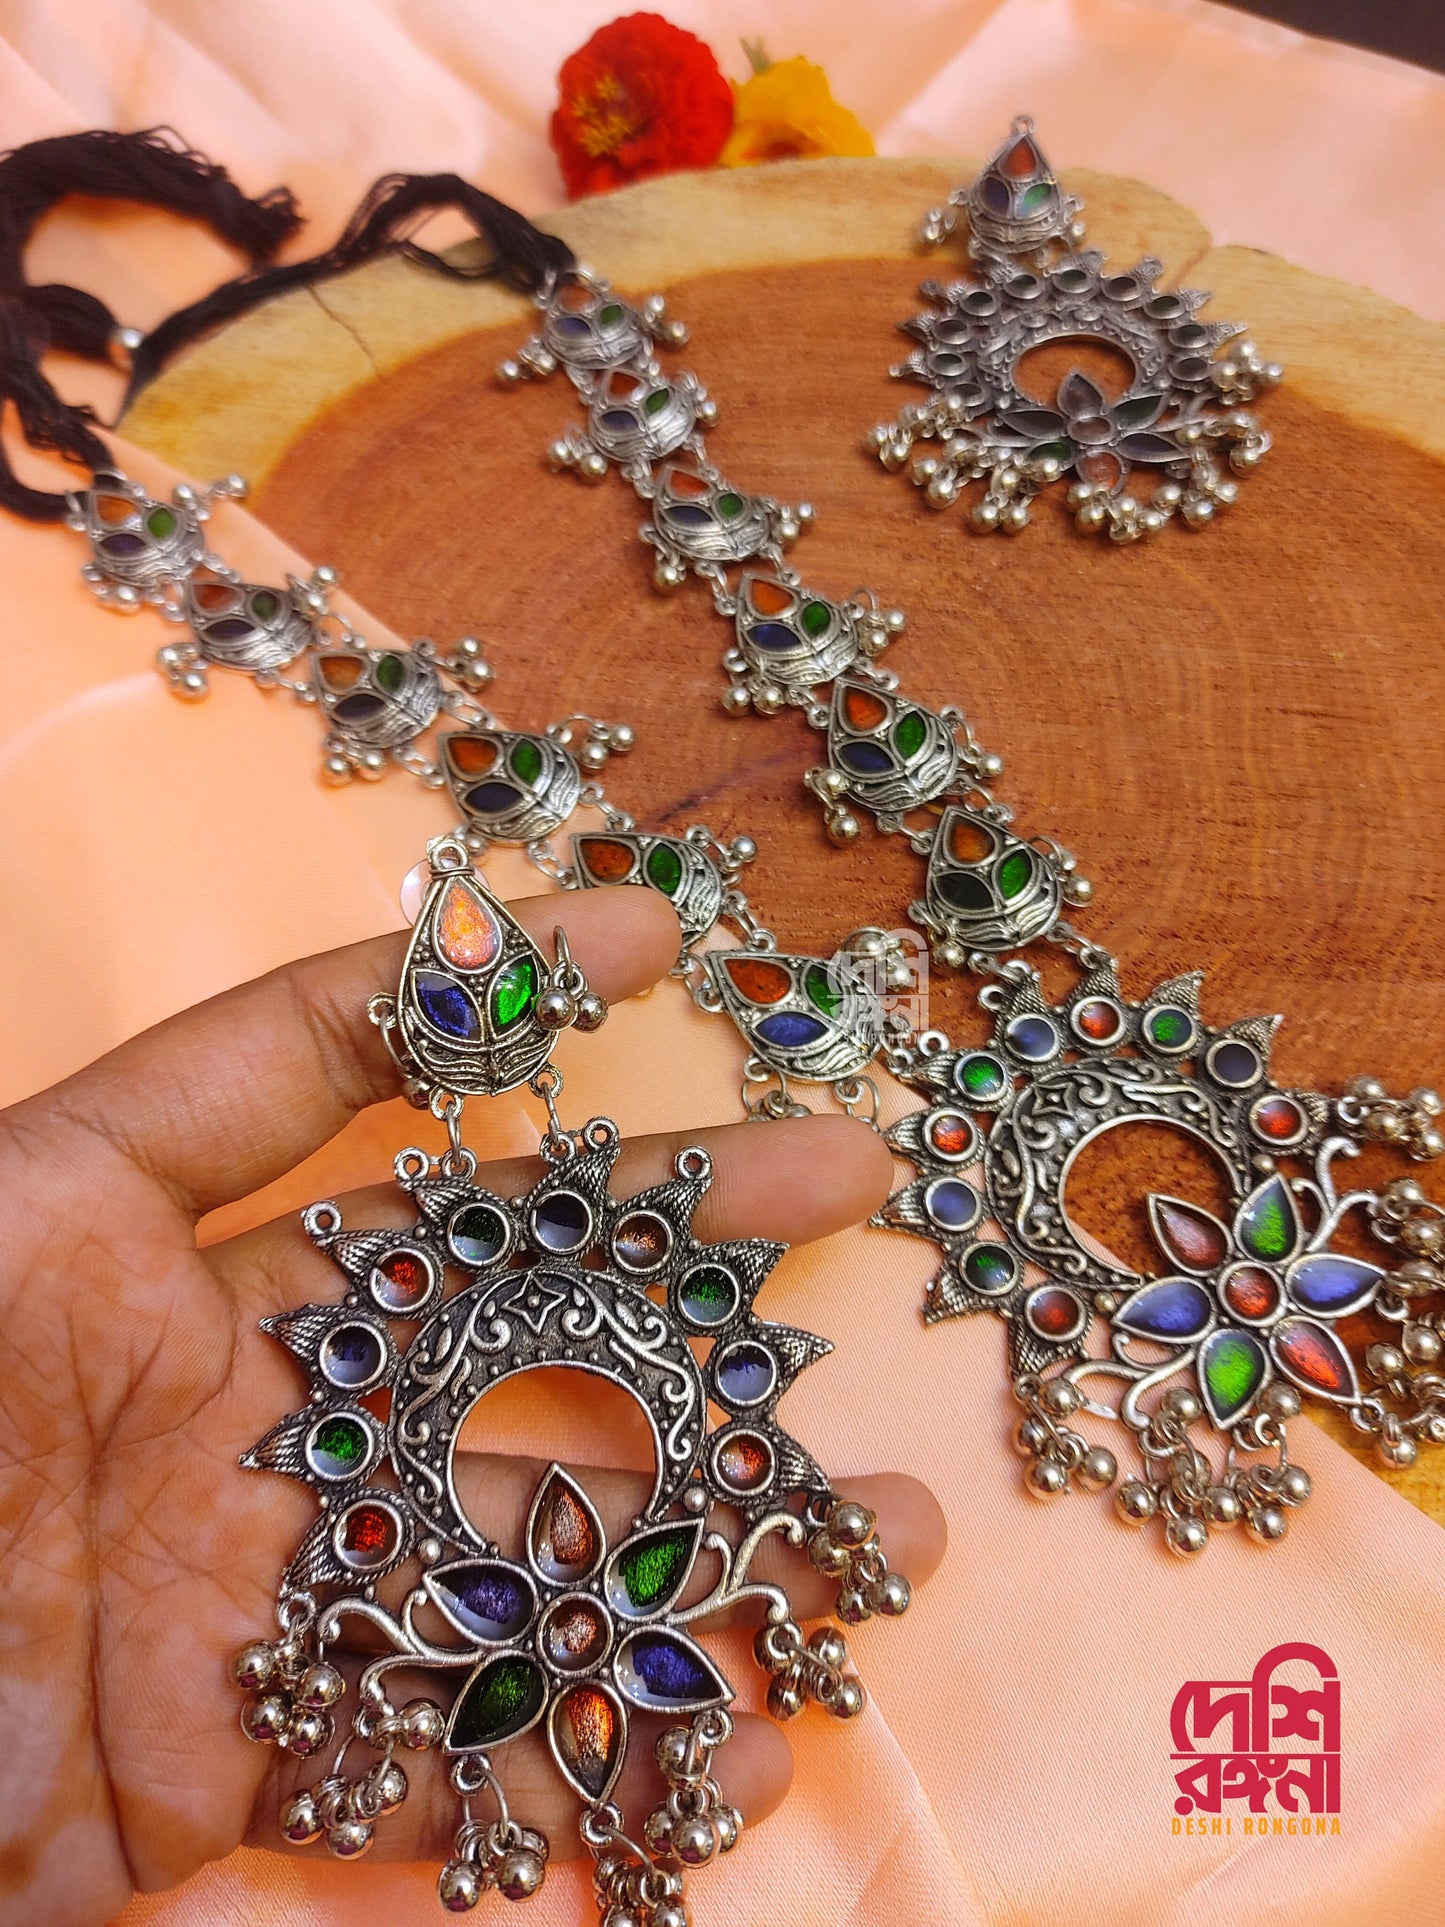 Silver Oxidised Jewelry, Antique Silver Plated, Multi stone, Necklace, Earrings,Indian Bollywood Jewelry,Fashion Set, Afgan/Bohemian Jewelry